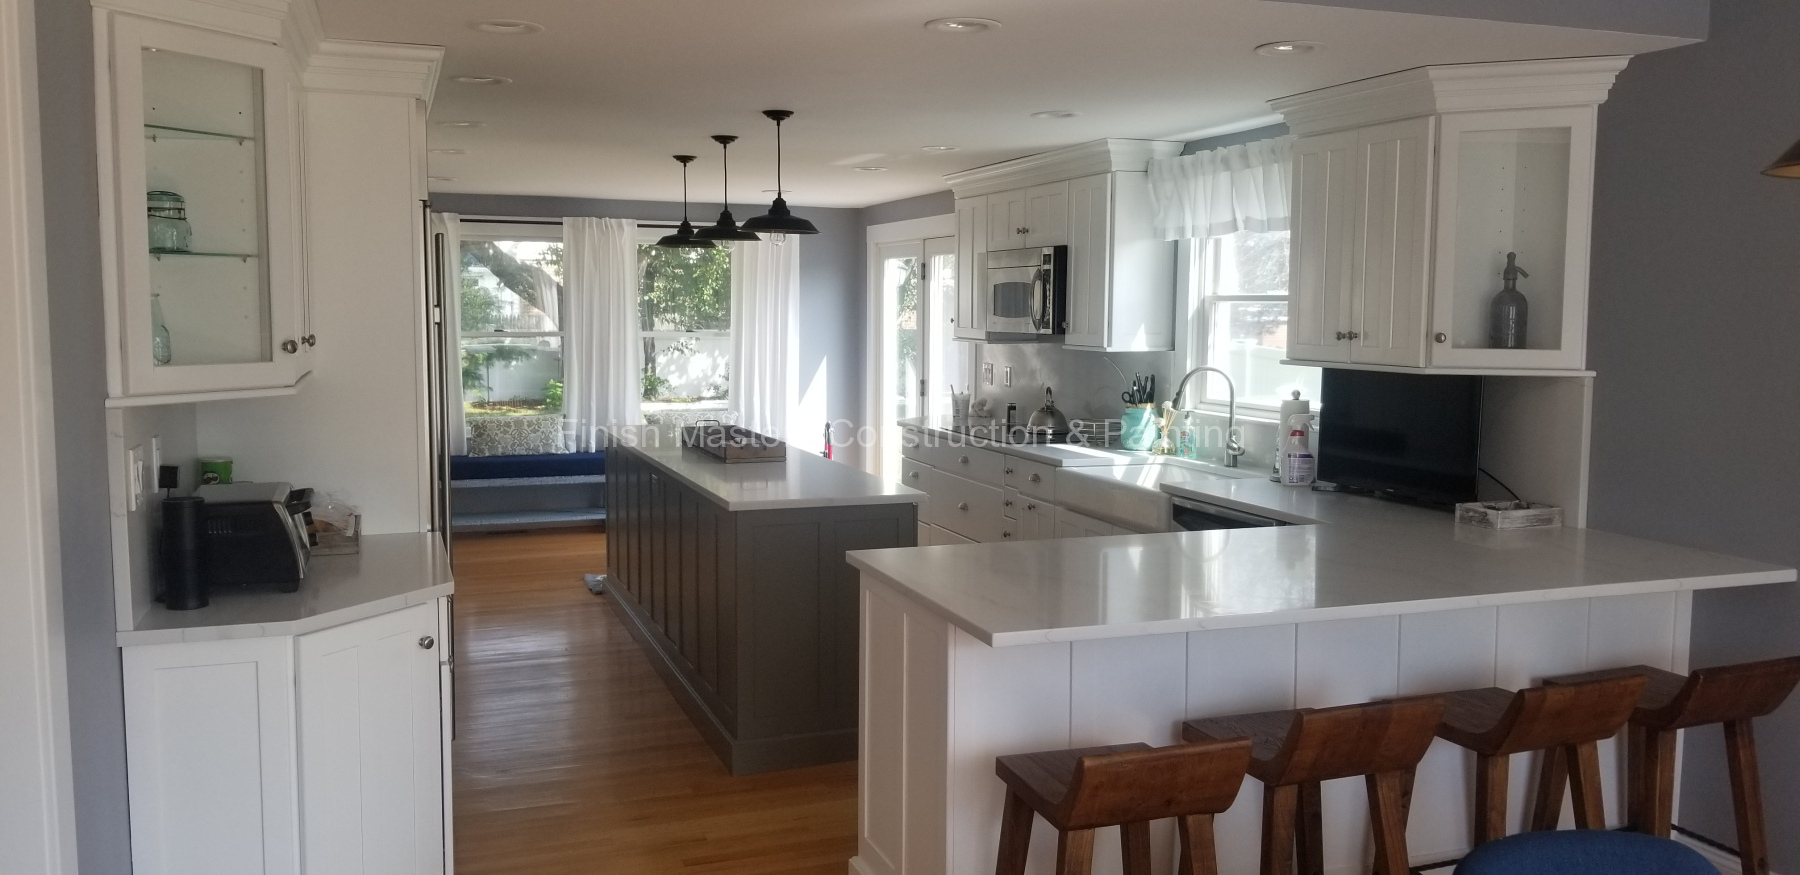 Kitchen Cabinet Refinishing in Waltham by Finish Masters